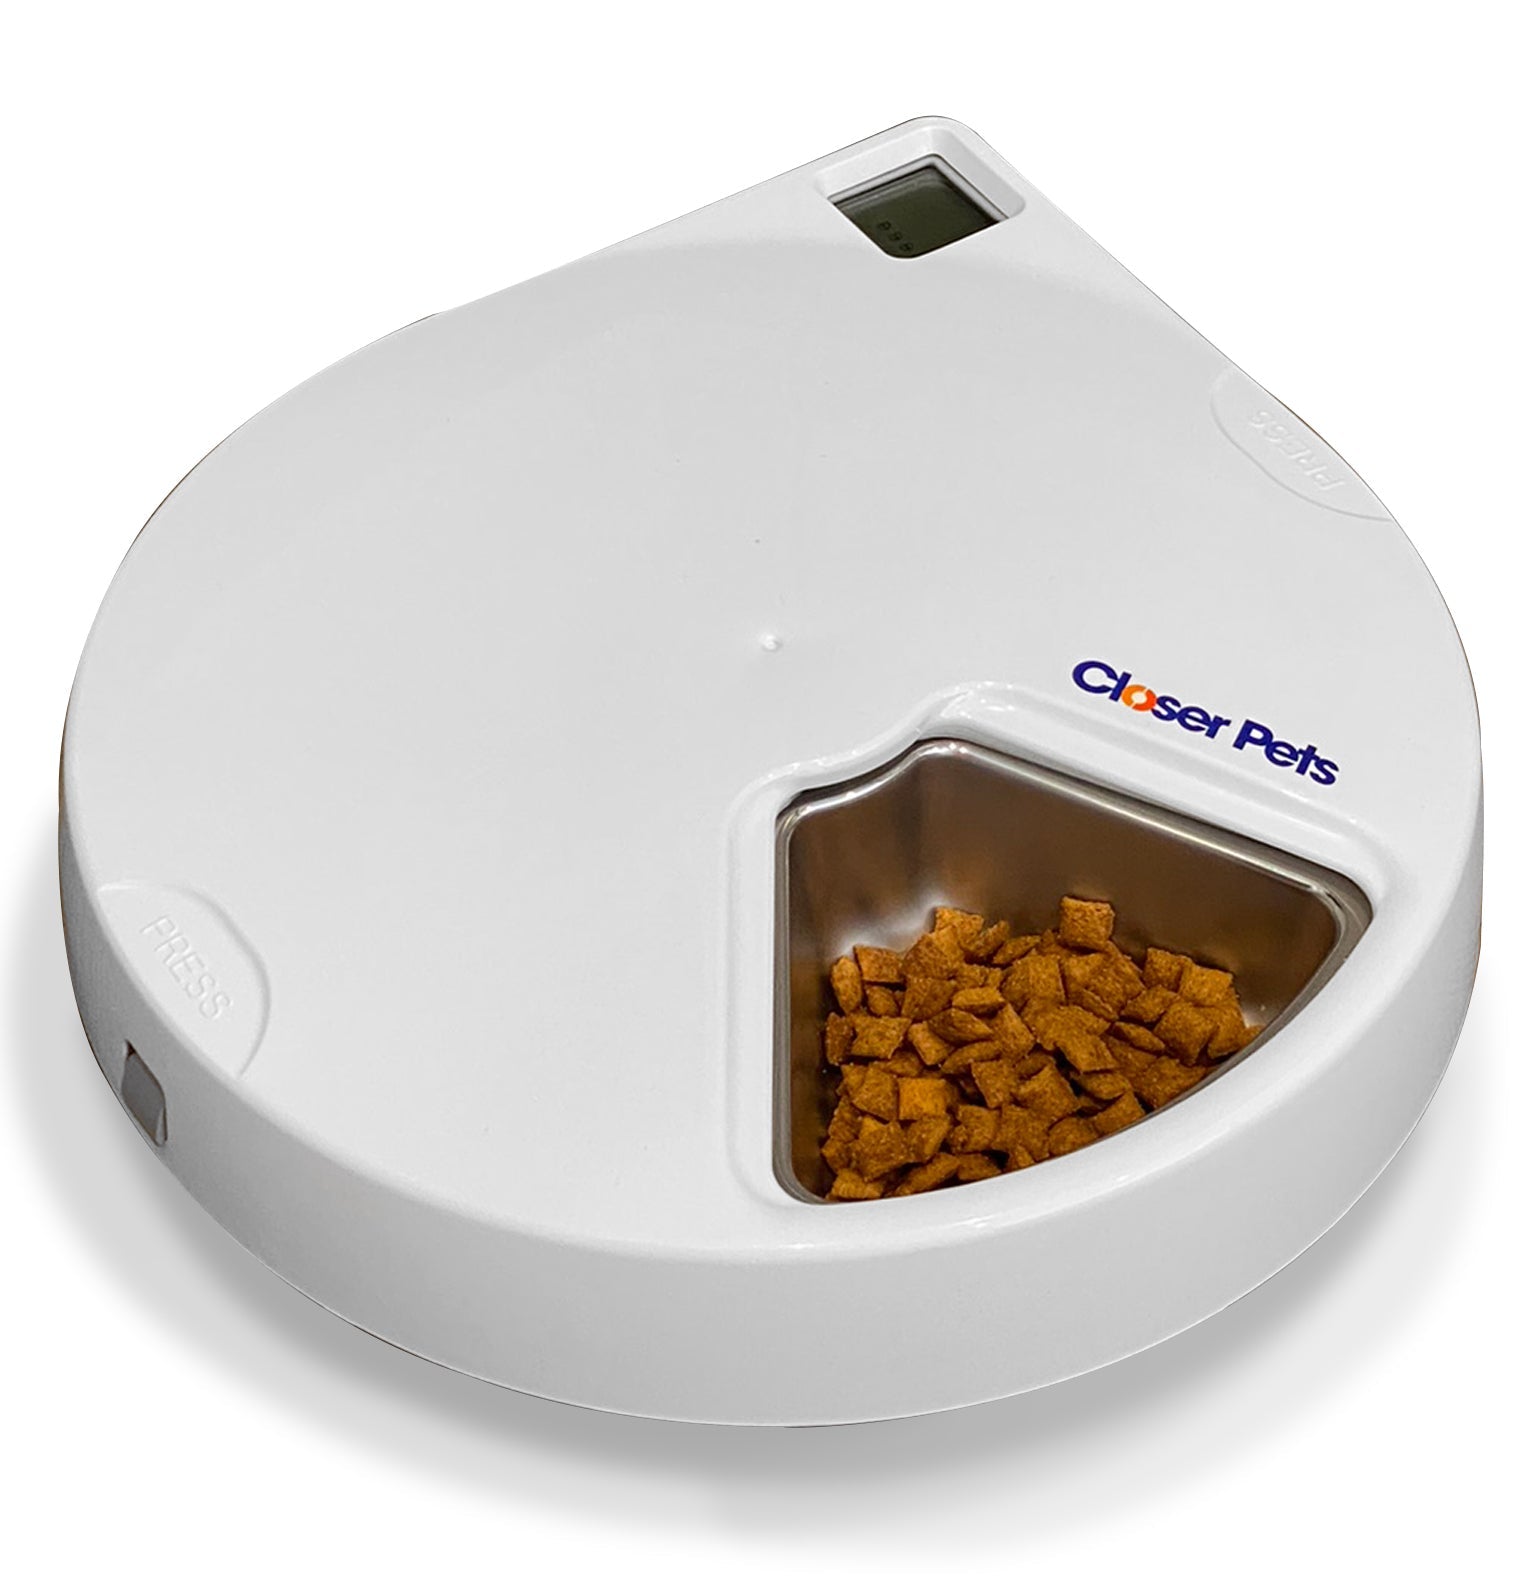 Closer Pets Five-Meal Automatic Pet Feeder with Stainless Steel Bowl Inserts and Ice Packs (C500)